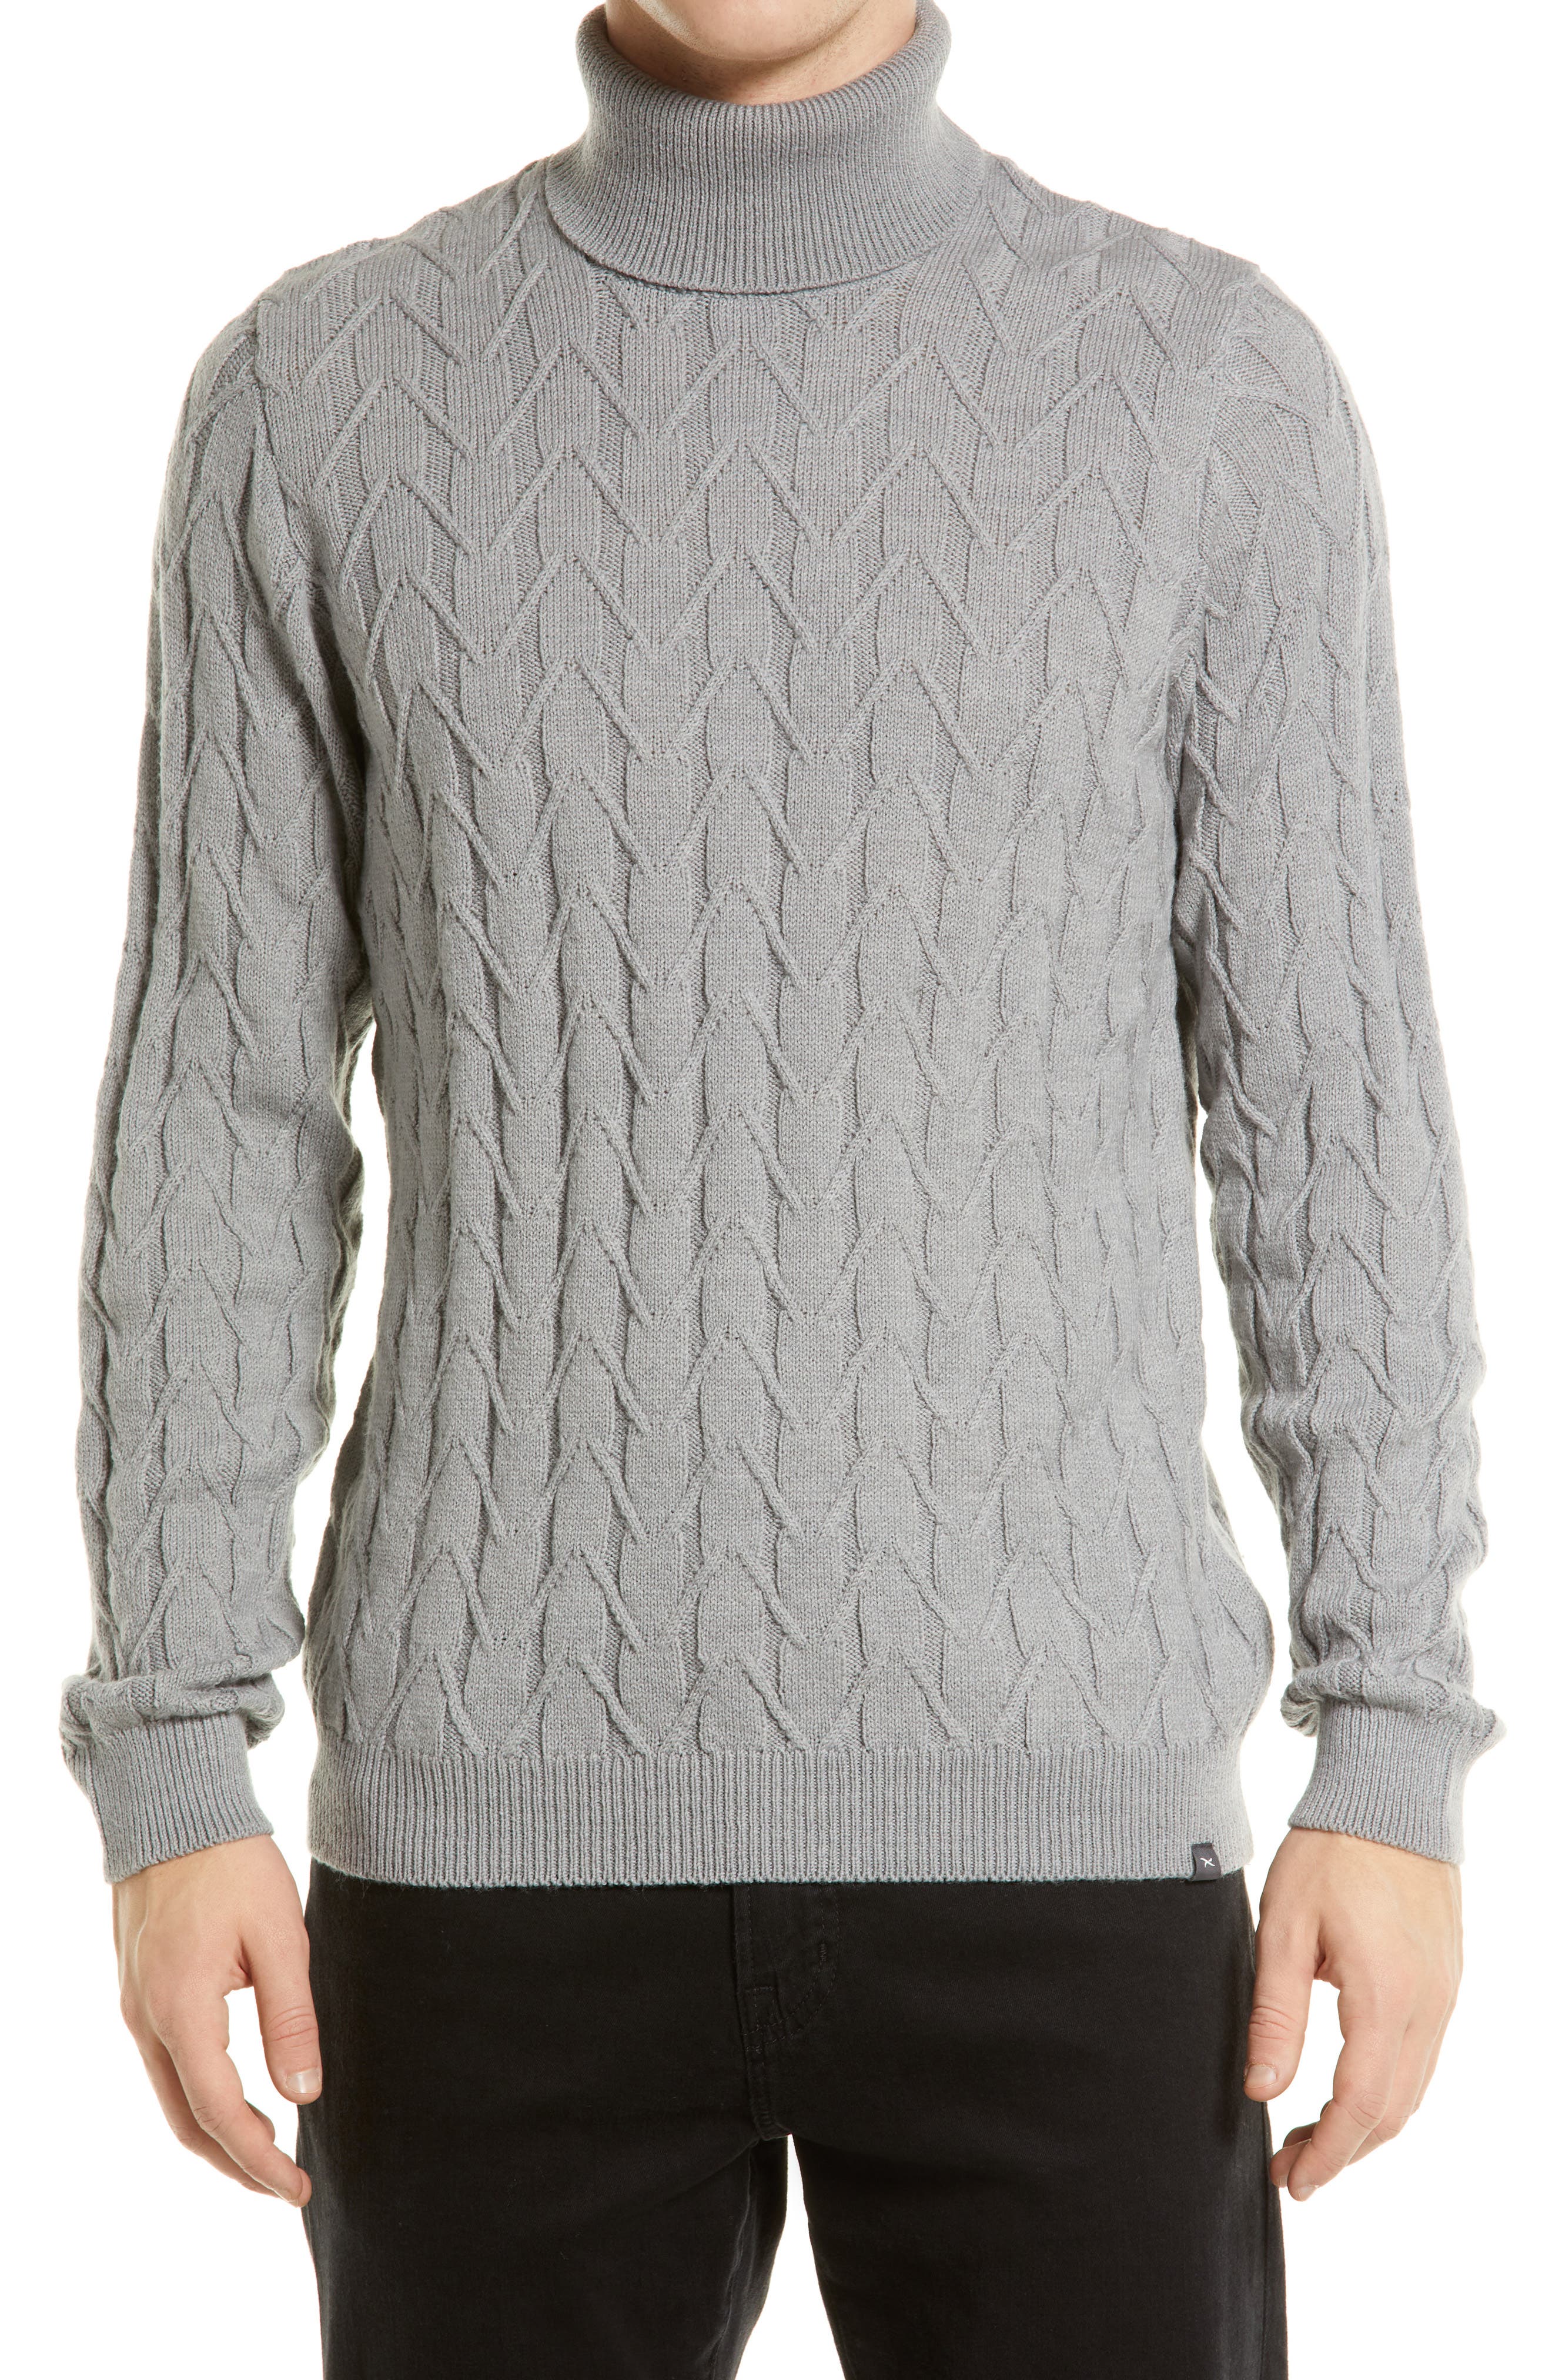 XQS Men Slim Fit Turtleneck Jumper Casual Twisted Knitted Pullover Sweaters 